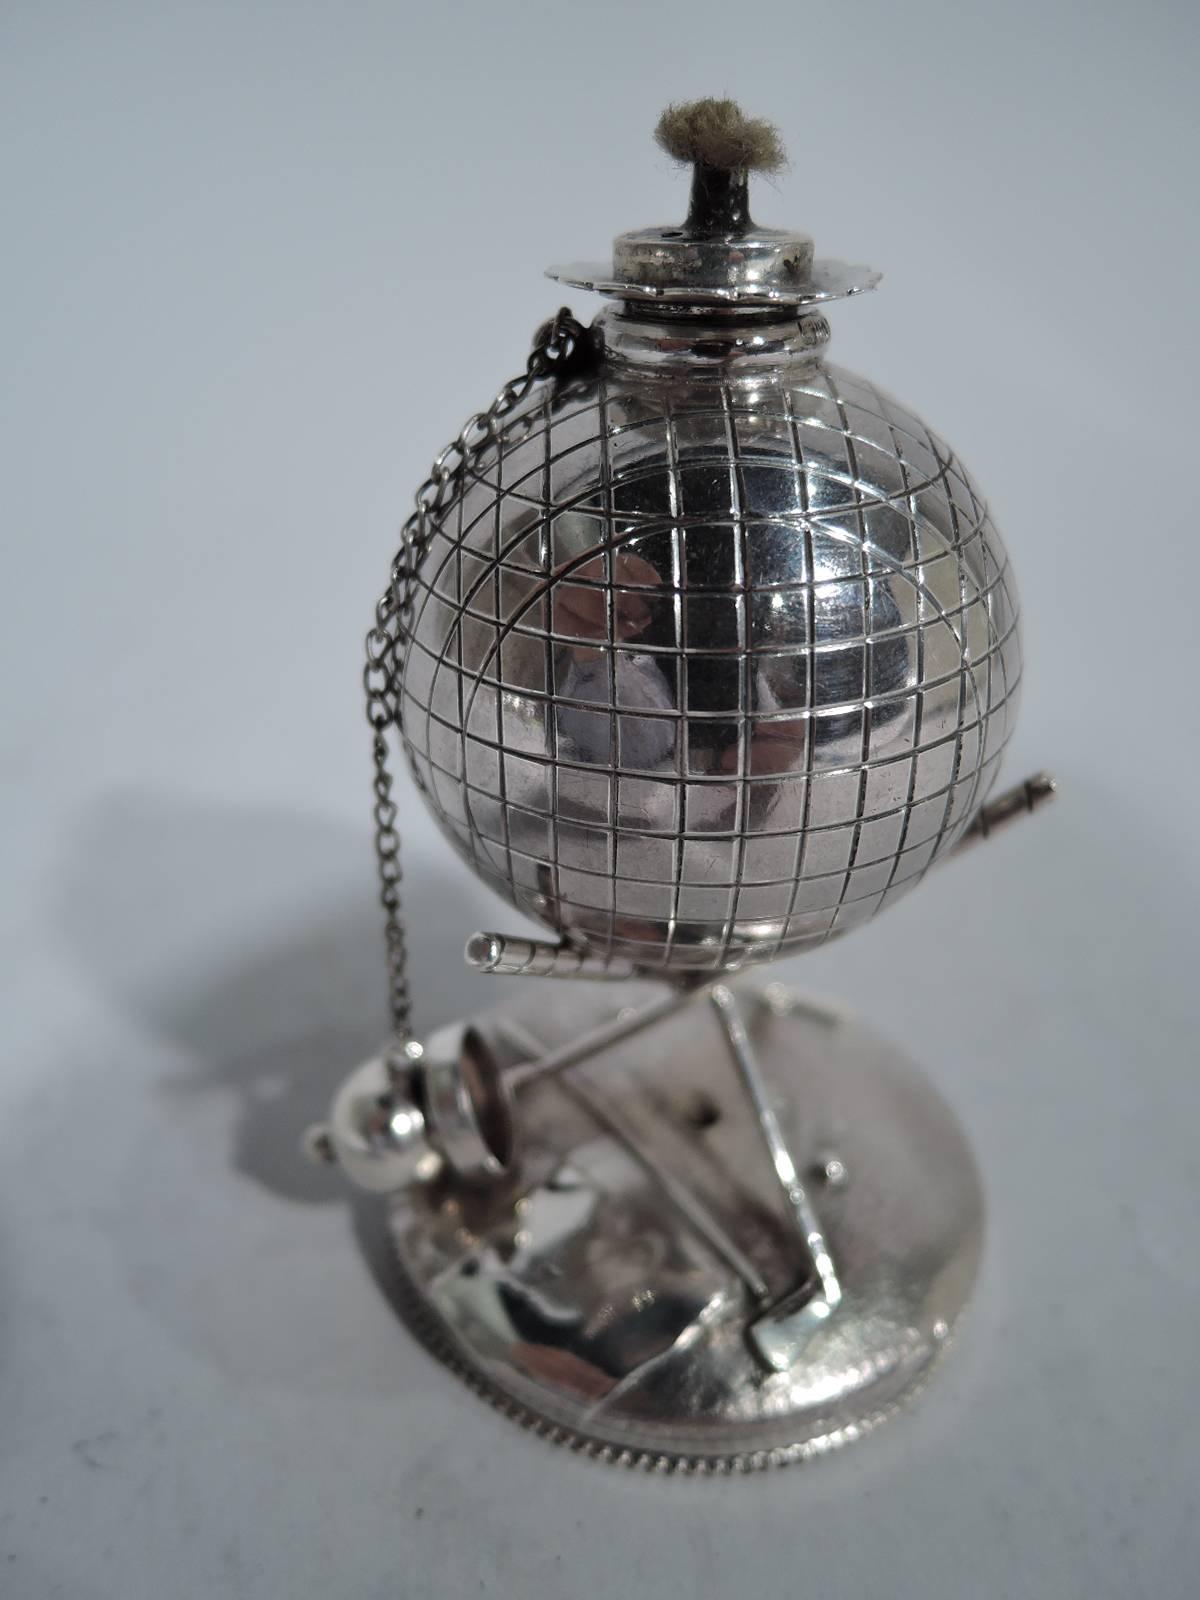 Sterling silver cigar lighter. Made by Reed & Barton in Taunton, Mass., circa 1920. Golf ball bowl with chained ball cover and threaded wick. Ball mounted to cradle comprising two crossed clubs mounted to raised and beaded circular base. An iconic